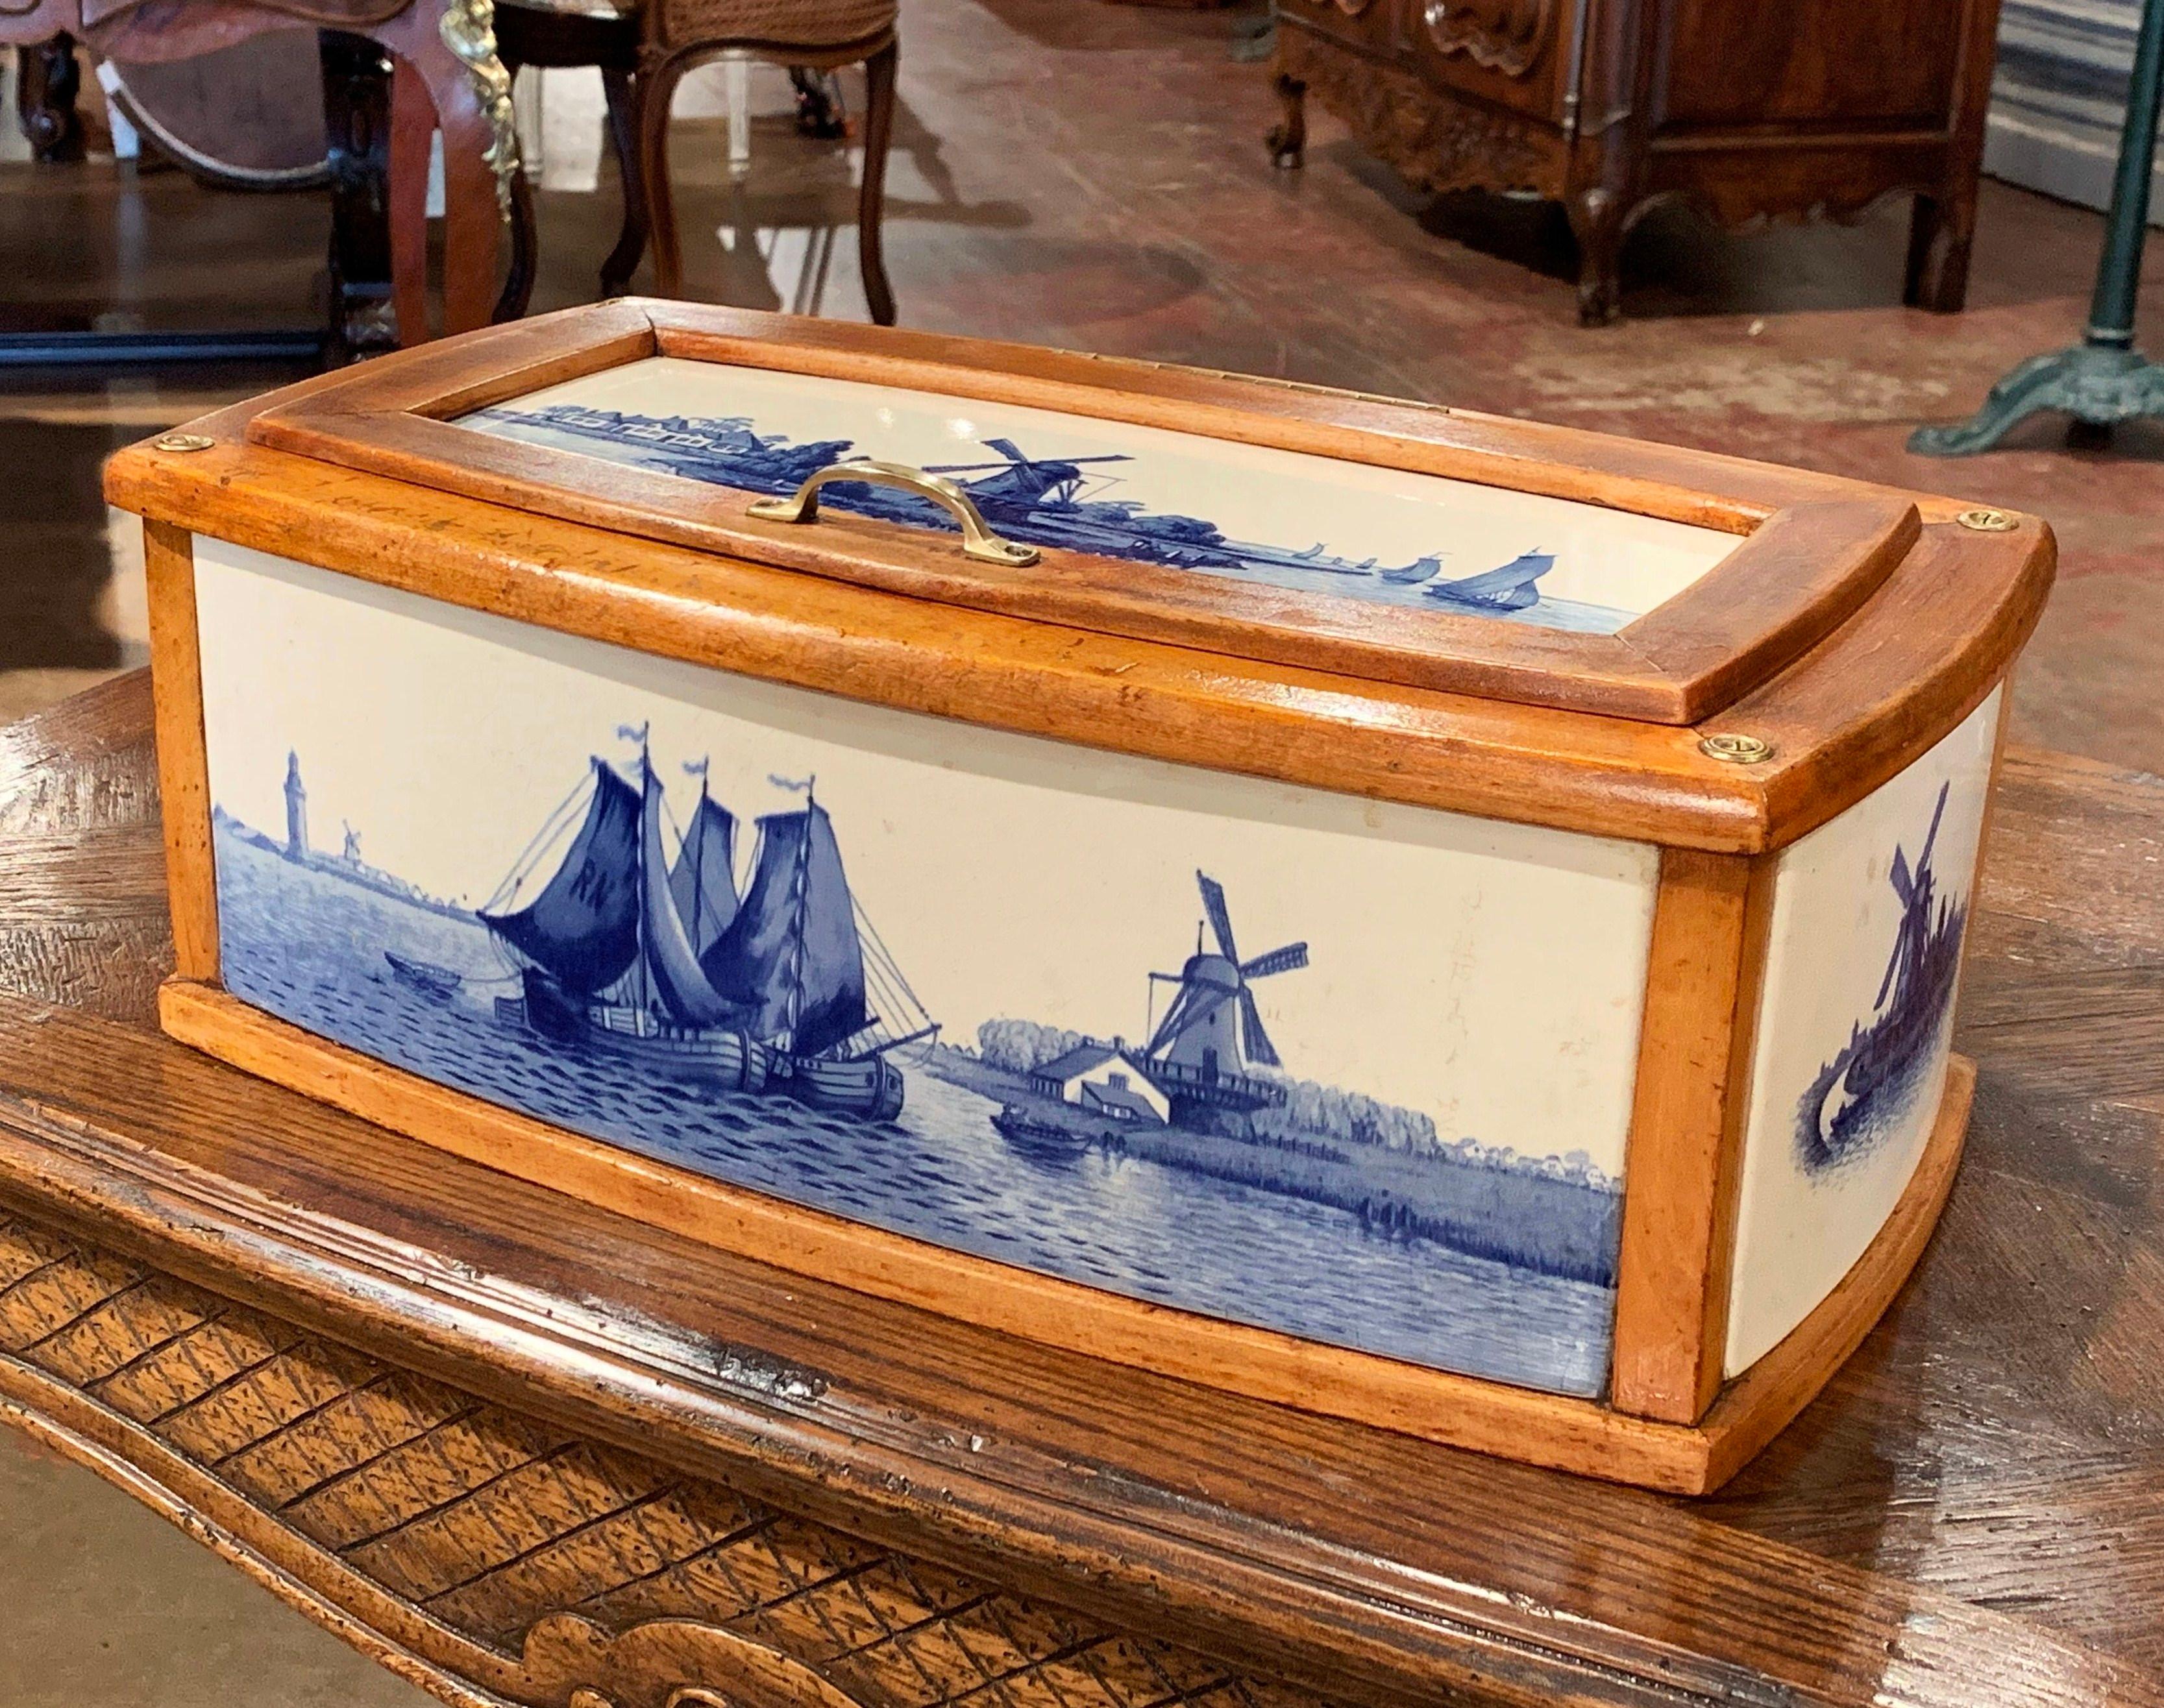 Hand-Crafted 19th Century French Maple and Porcelain Tile Bread Box from Villeroy and Boch